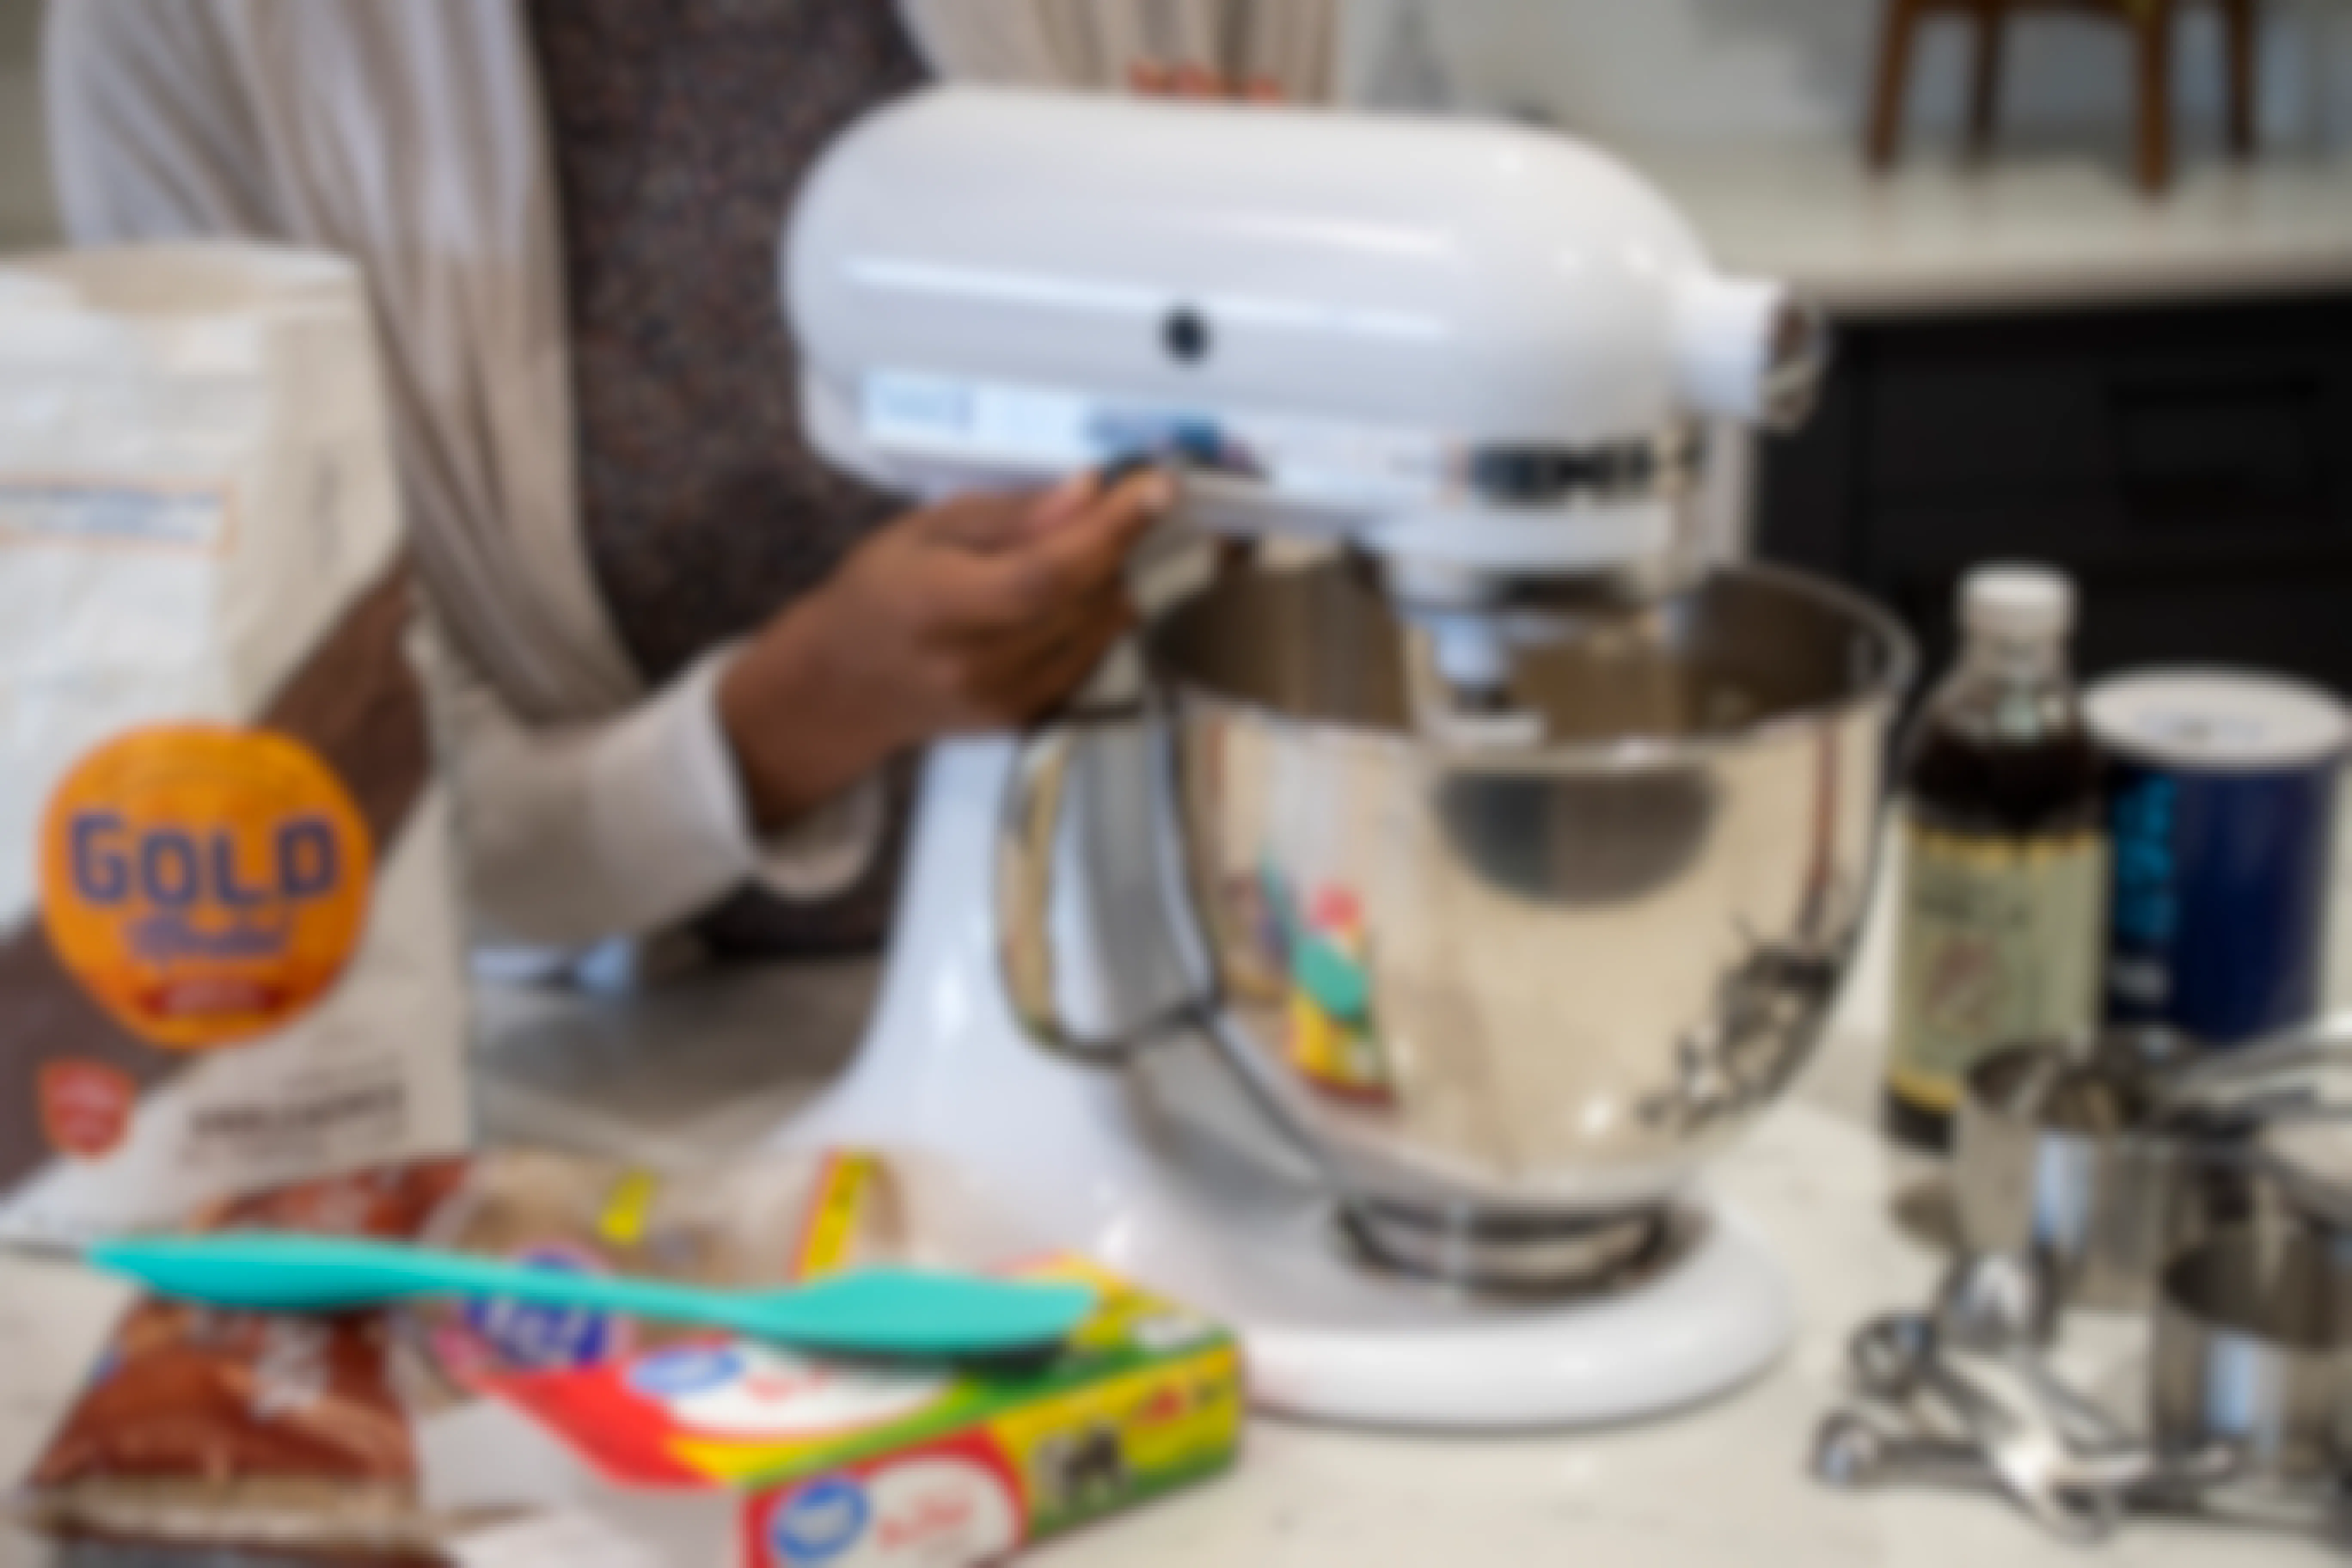 A person mixing ingredients inside a KitchenAid stand mixer.